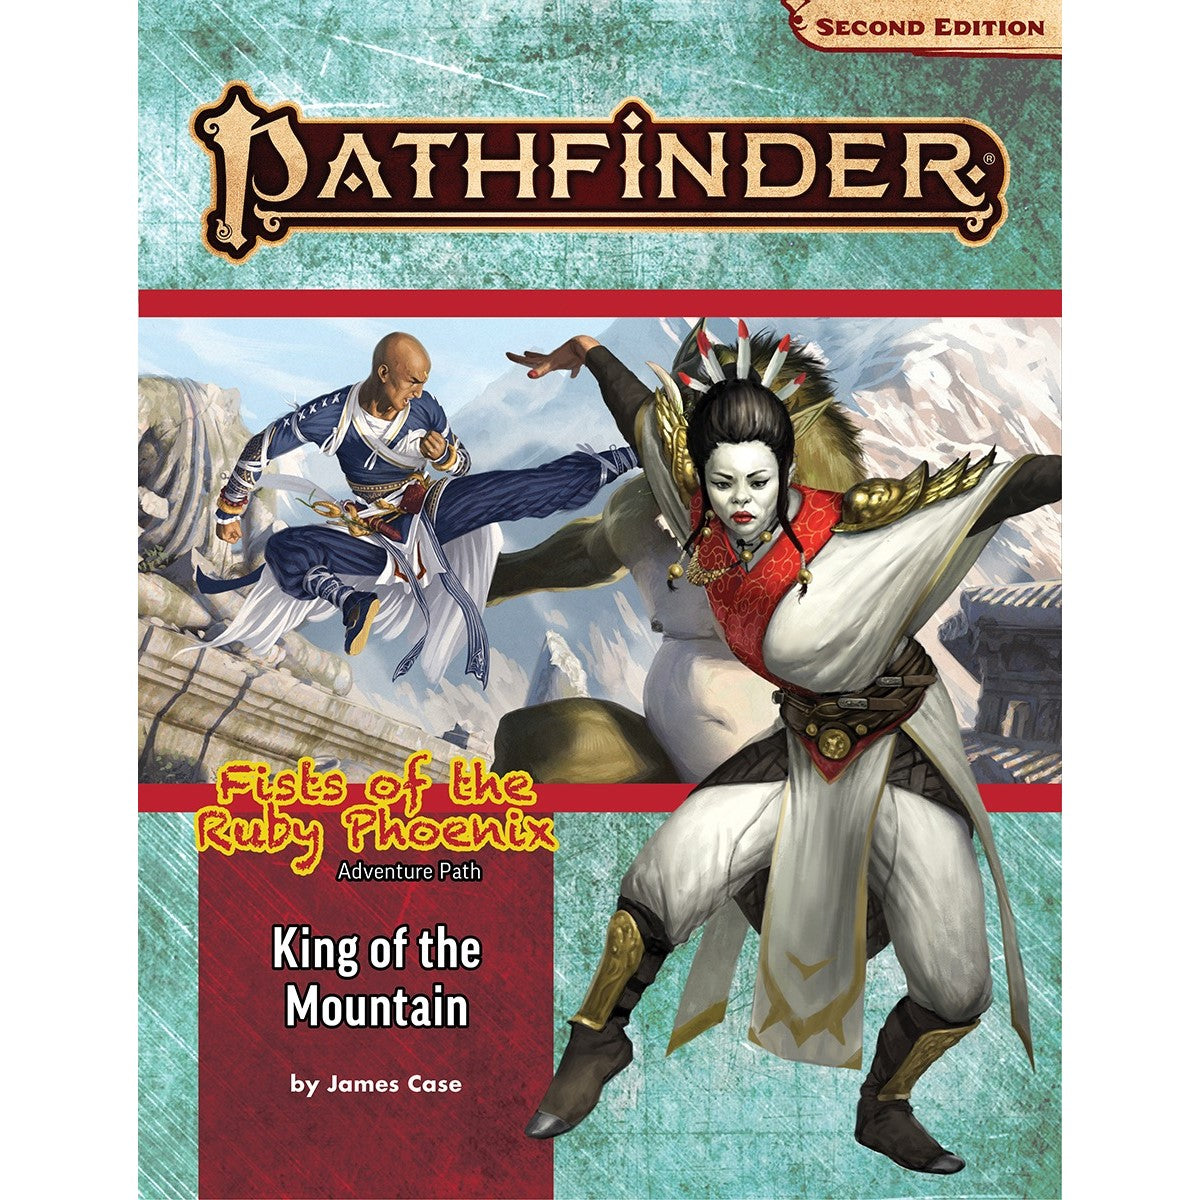 Pathfinder Second Edition Adventure Path Fists of the Ruby Phoenix #3 King of the Mountain